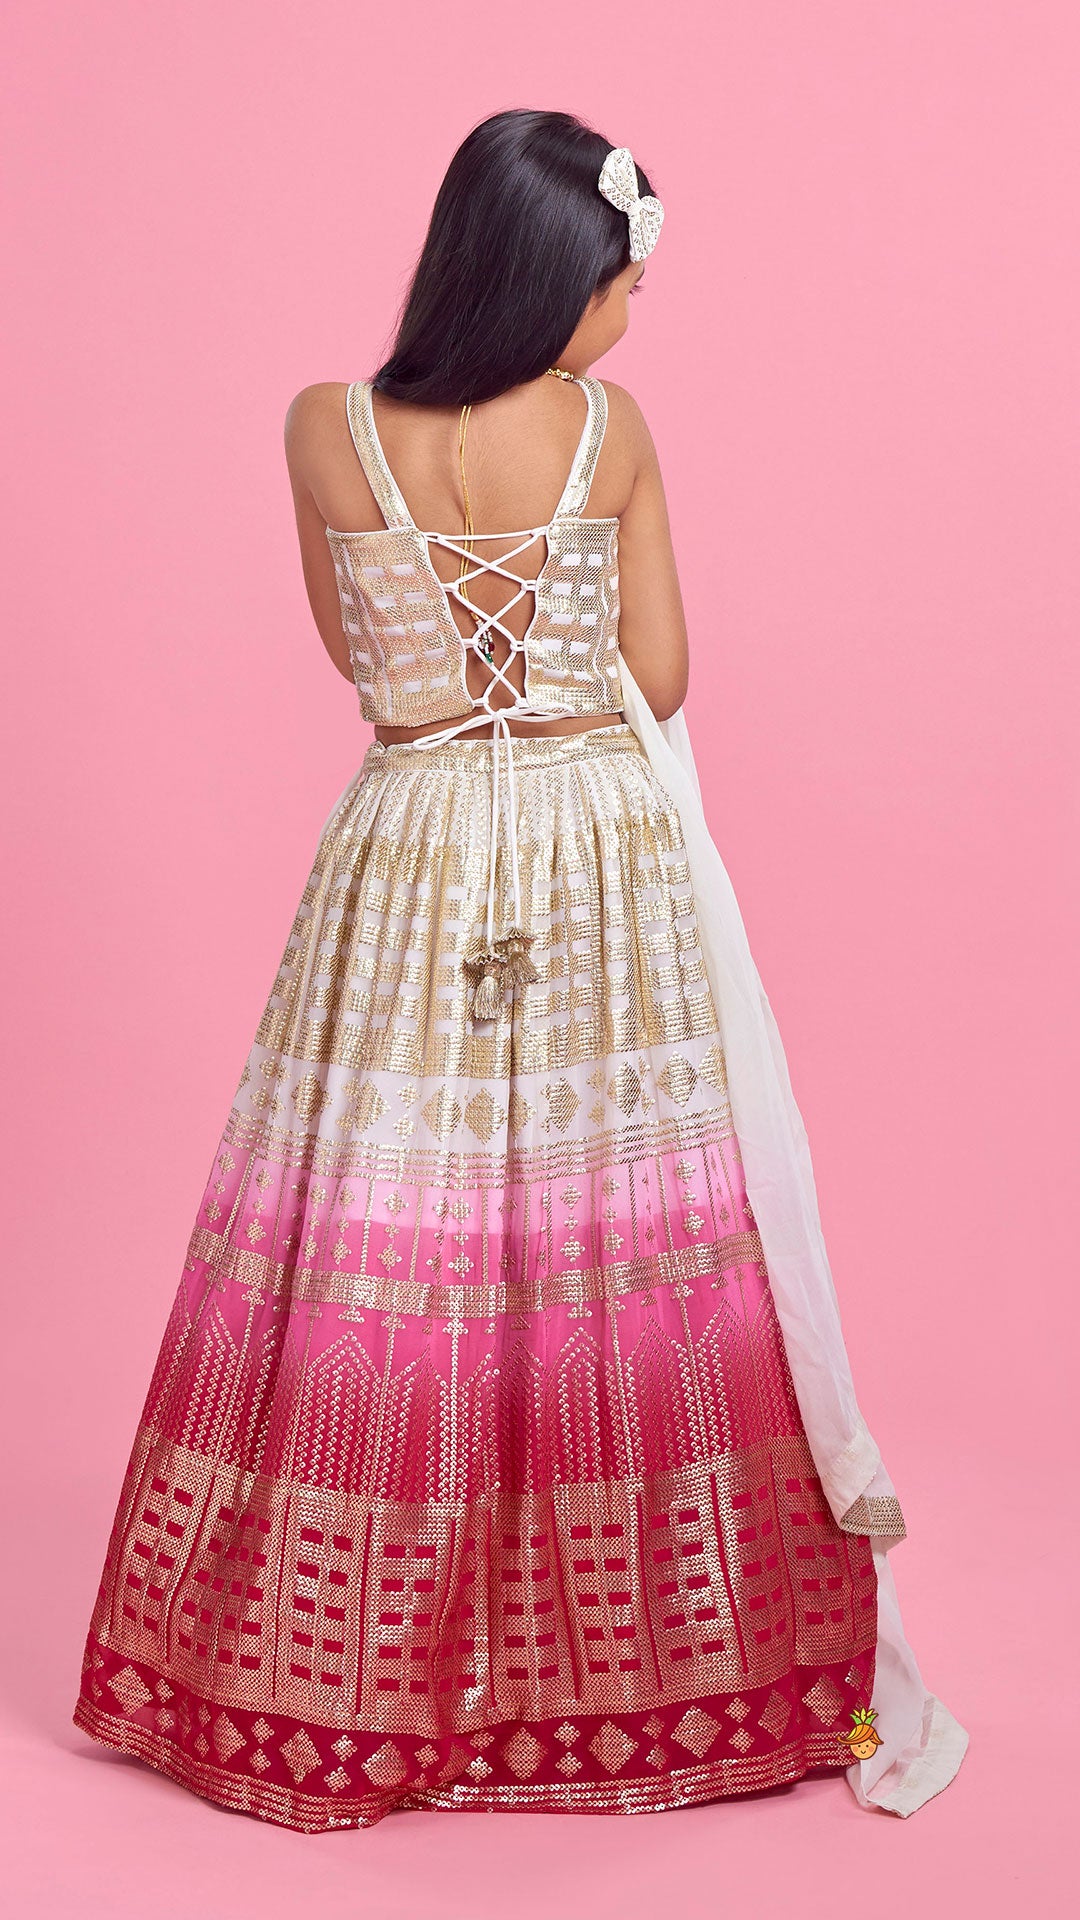 Sequined Off White Top And Two Tone Lehenga With Dupatta And Matching Potli Bag With Bowie Hair Clip